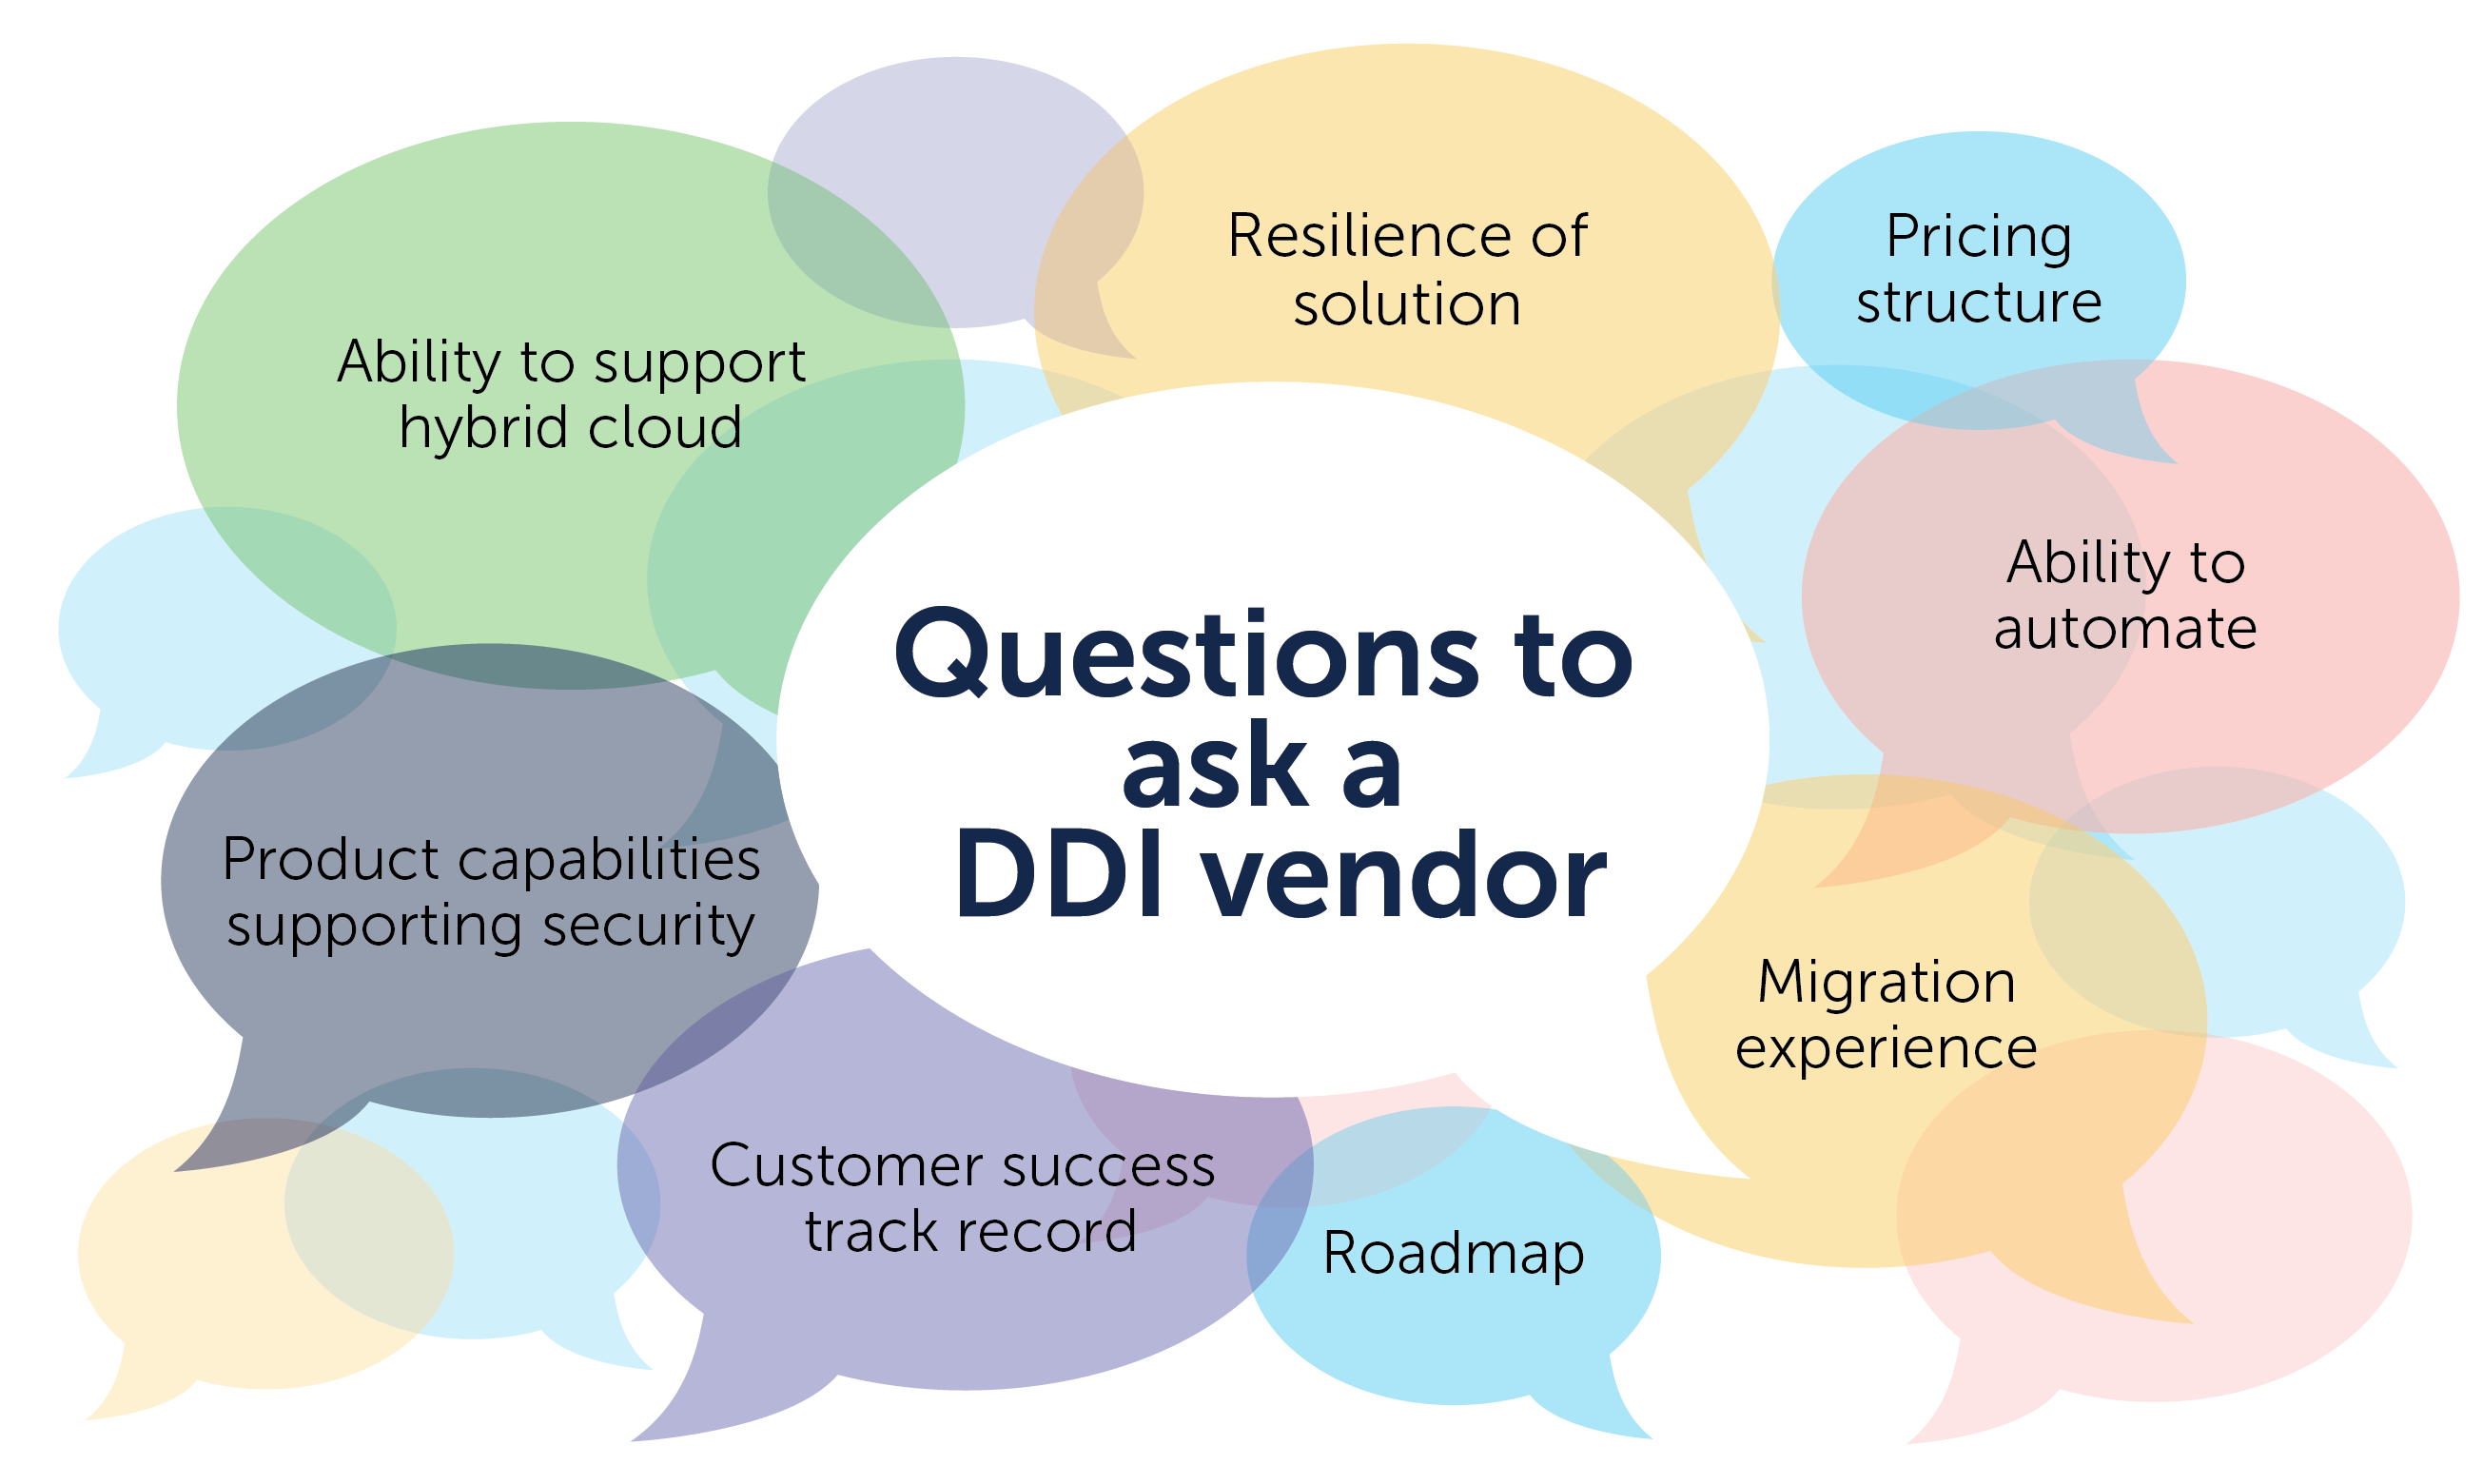 Thought bubbles of questions to ask a DDI vendor